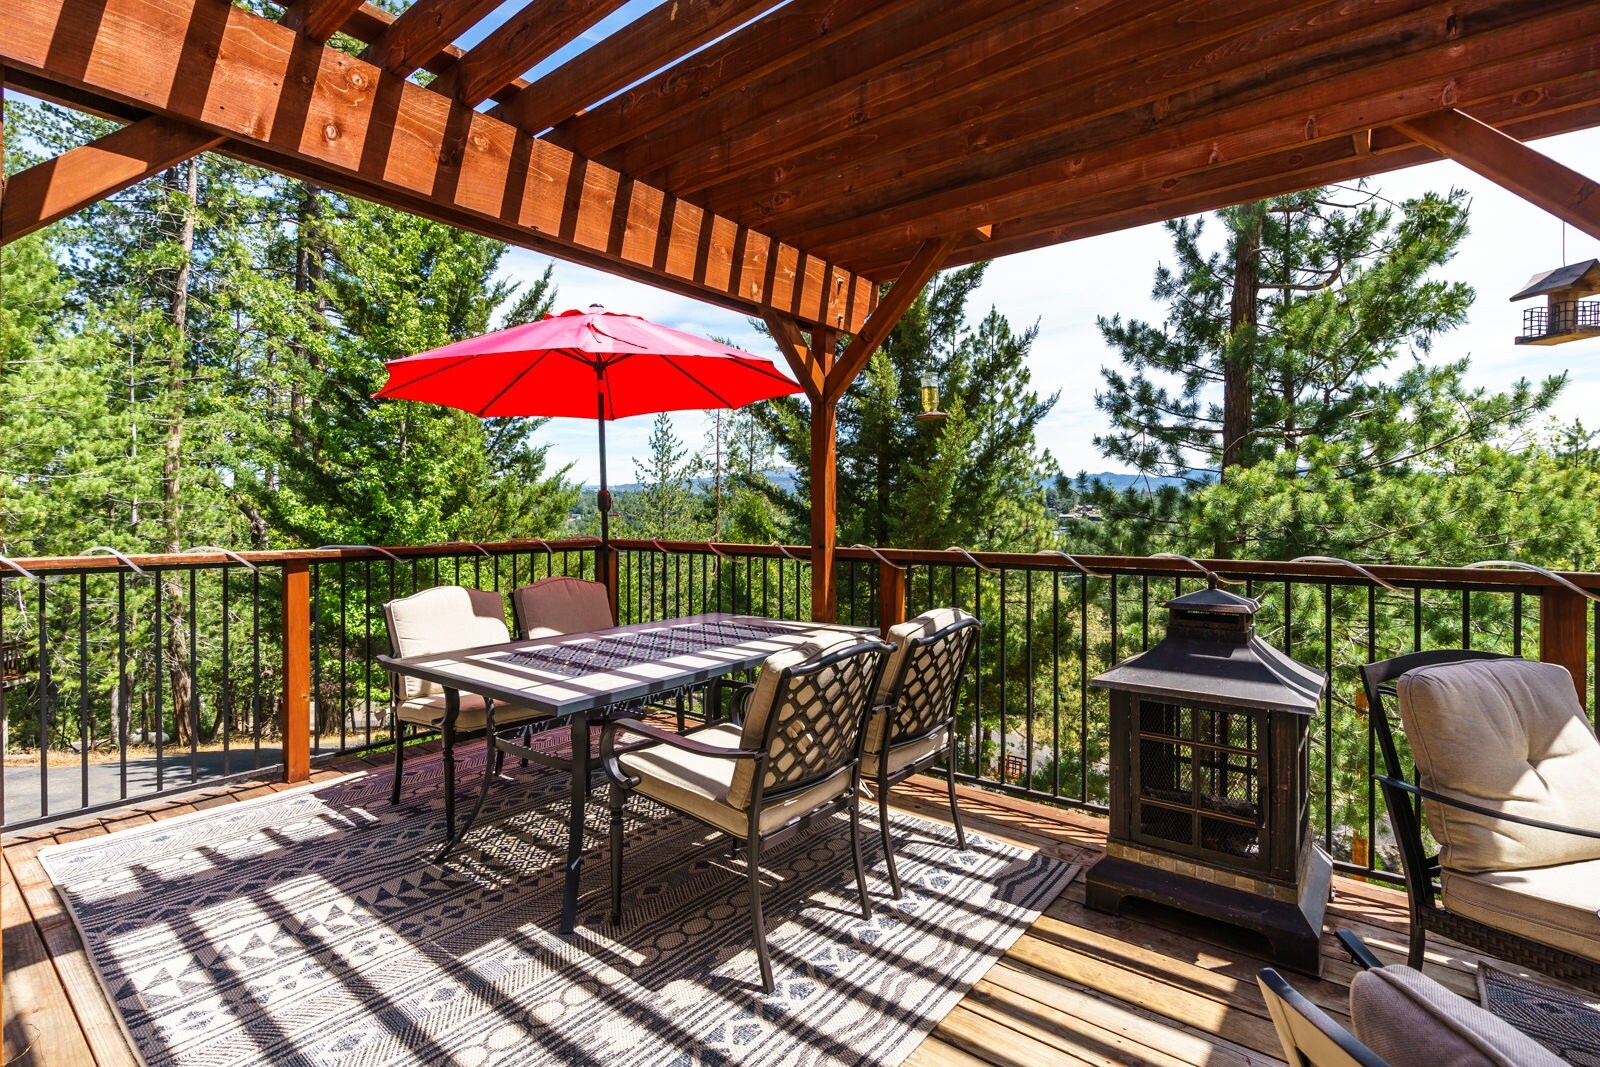 Deck and seating. Pine Mountain Lake Vacation Rental, "The Happy Place", Unit 15 Lot 41.